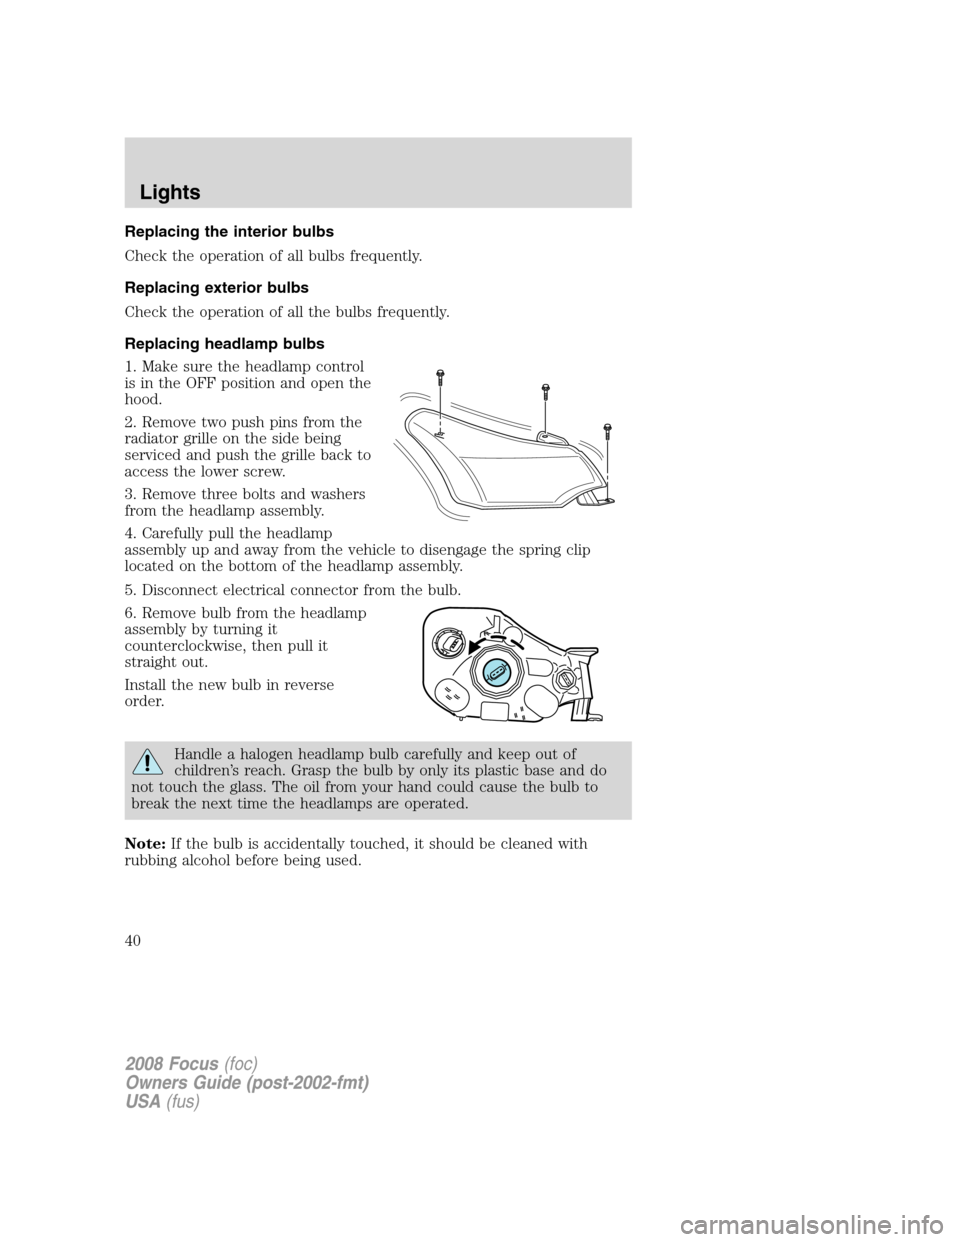 FORD FOCUS 2008 2.G Owners Manual Replacing the interior bulbs
Check the operation of all bulbs frequently.
Replacing exterior bulbs
Check the operation of all the bulbs frequently.
Replacing headlamp bulbs
1. Make sure the headlamp c